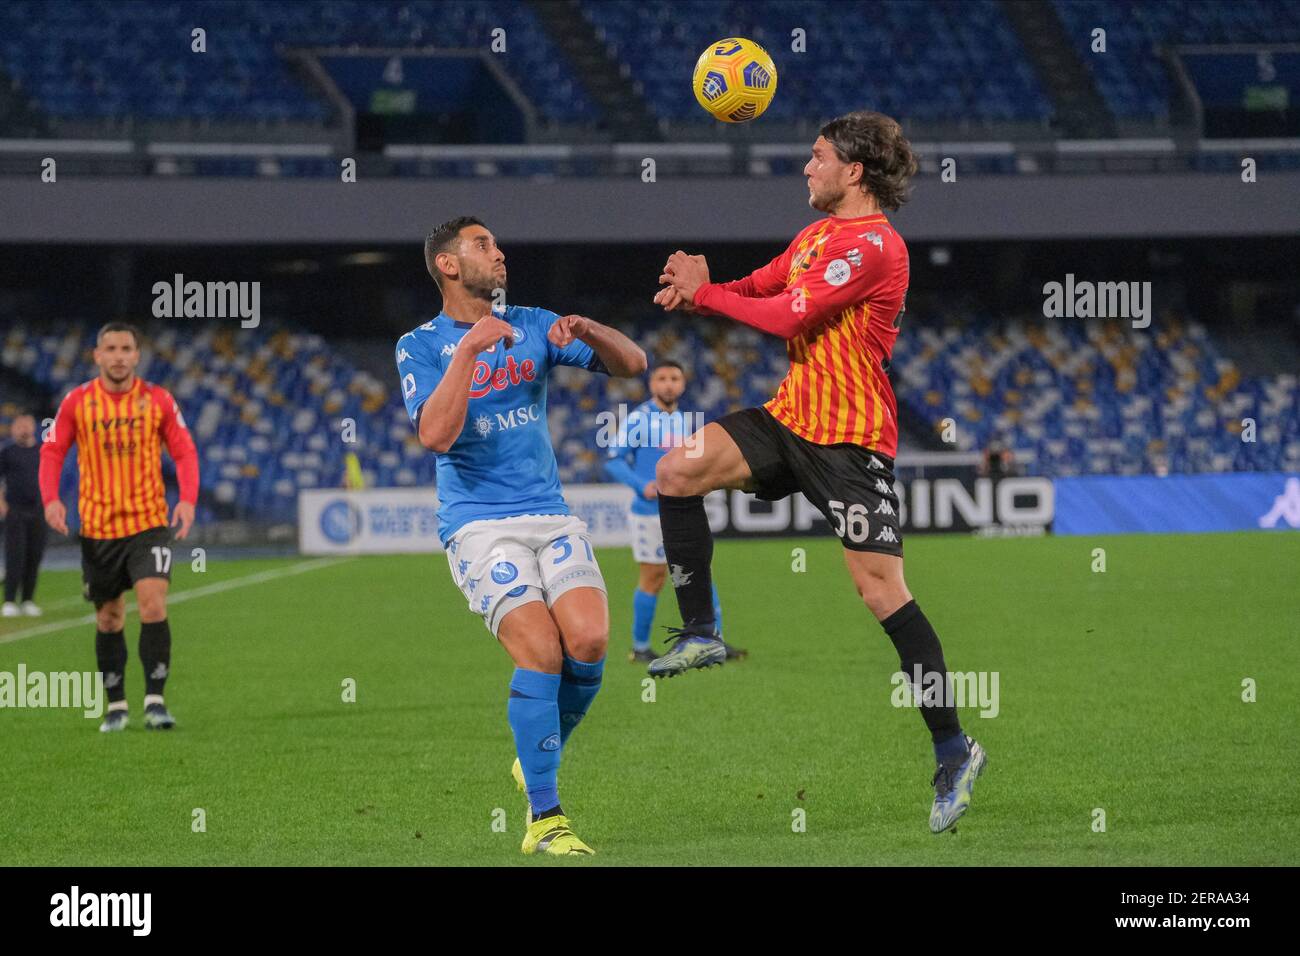 SSC Napoli's Algerian defender Faouzi Ghoulam  (L) challenges for the ball with BeneventoÕs Finnish midfielder Perparim Hetemaj during the Serie A football match between SSC Napoli and Benevento at the Diego Armando Maradona Stadium, Naples, Italy, on 03 February  2021 Stock Photo